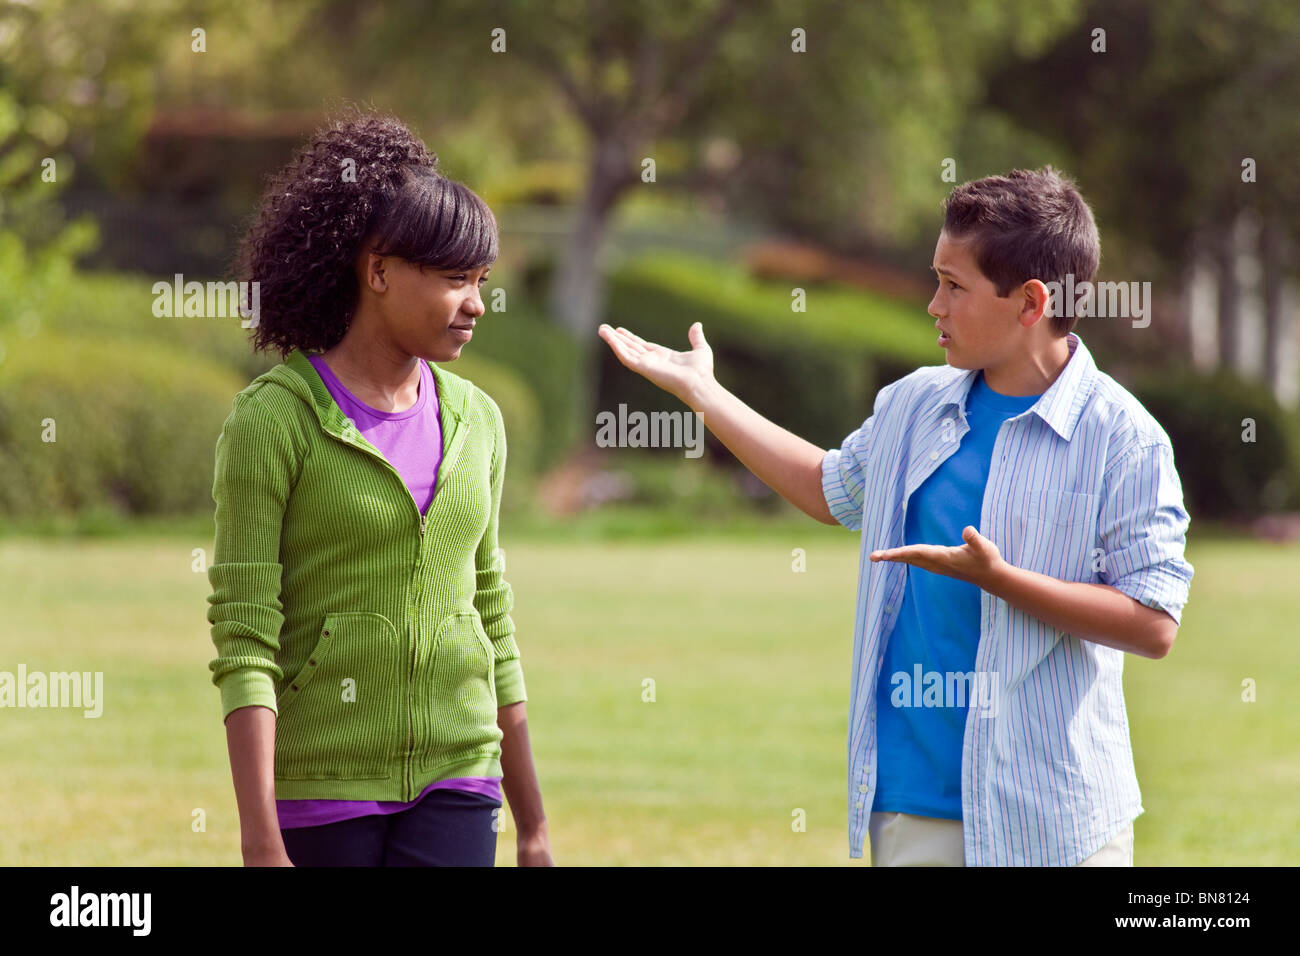 14-16 year years multi ethnic inter racial diversity racially diverse multicultural  cultural interracial teens hanging out Stock Photo